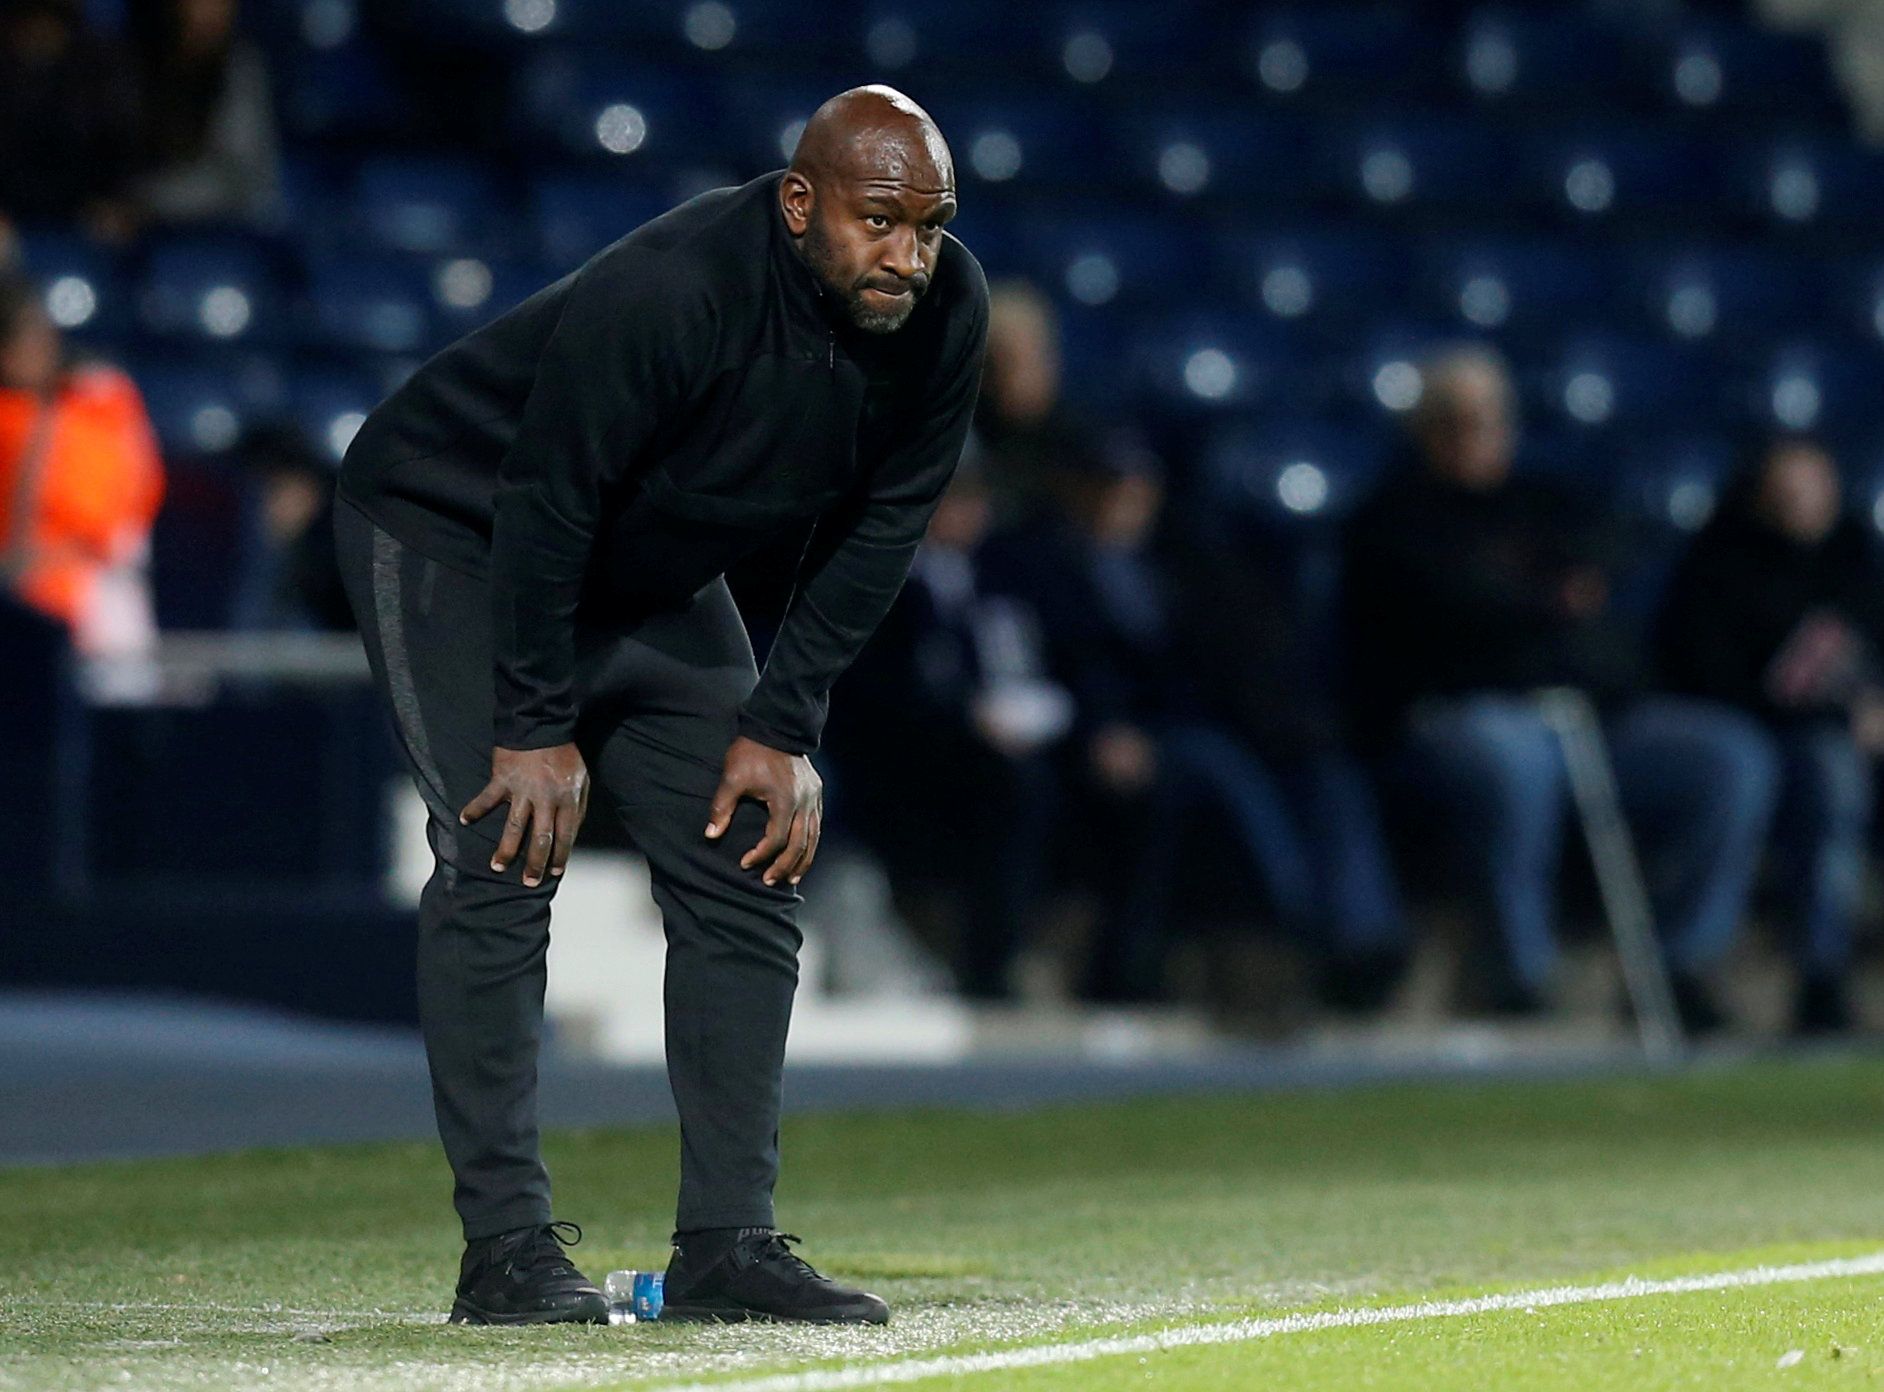 Soccer Football - Carabao Cup - Third Round - West Bromwich Albion v Crystal Palace - The Hawthorns, West Bromwich, Britain - September 25, 2018  West Brom manager Darren Moore  Action Images via Reuters/Ed Sykes  EDITORIAL USE ONLY. No use with unauthorized audio, video, data, fixture lists, club/league logos or 